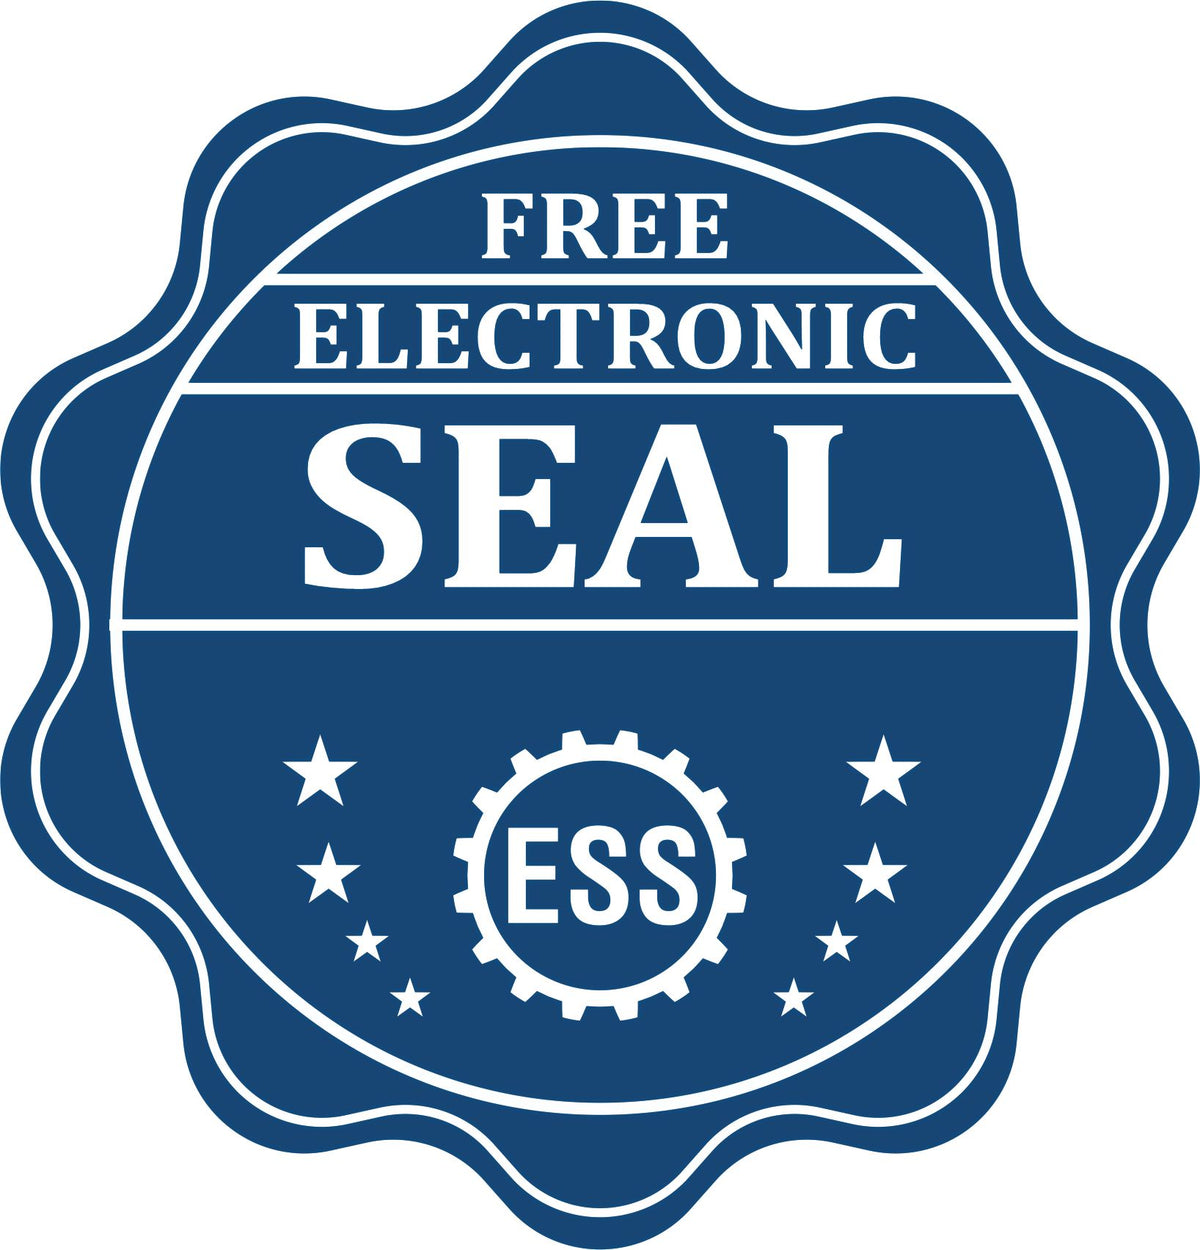 A badge showing a free electronic seal for the Handheld Wisconsin Professional Geologist Embosser with stars and the ESS gear on the emblem.